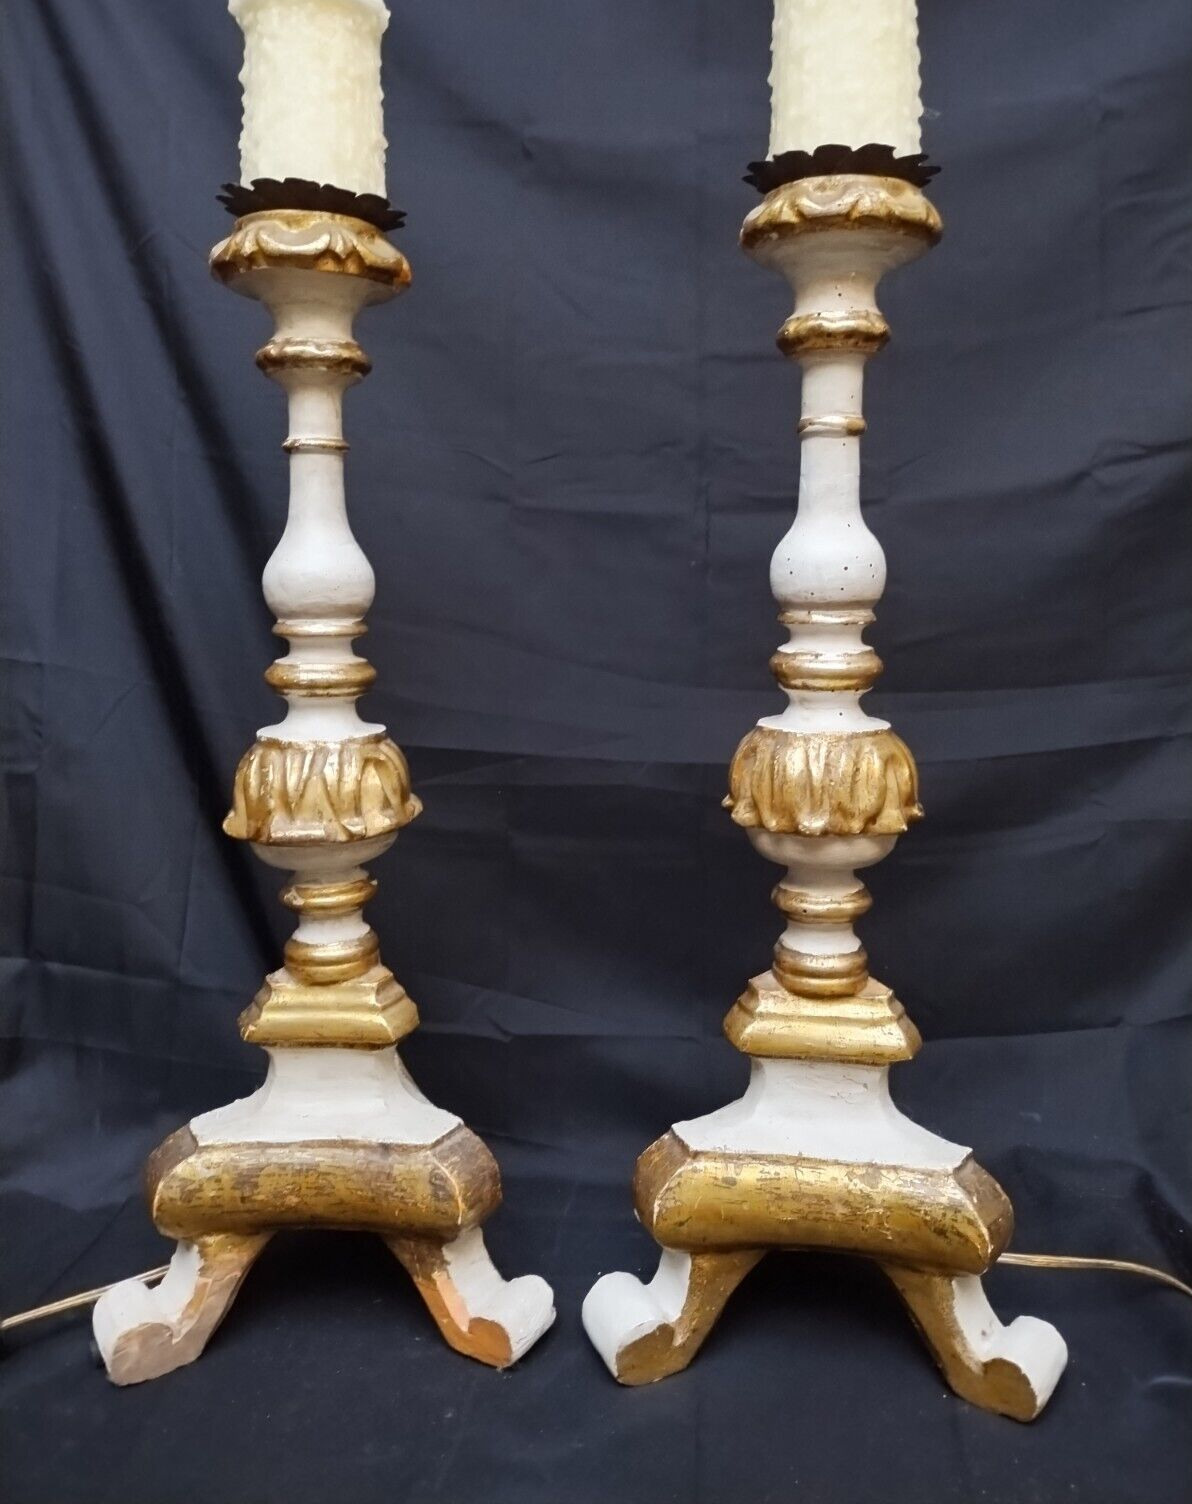 Antique Pair 2 Giltwood Pricket Candlesticks converted to lamps Carved French